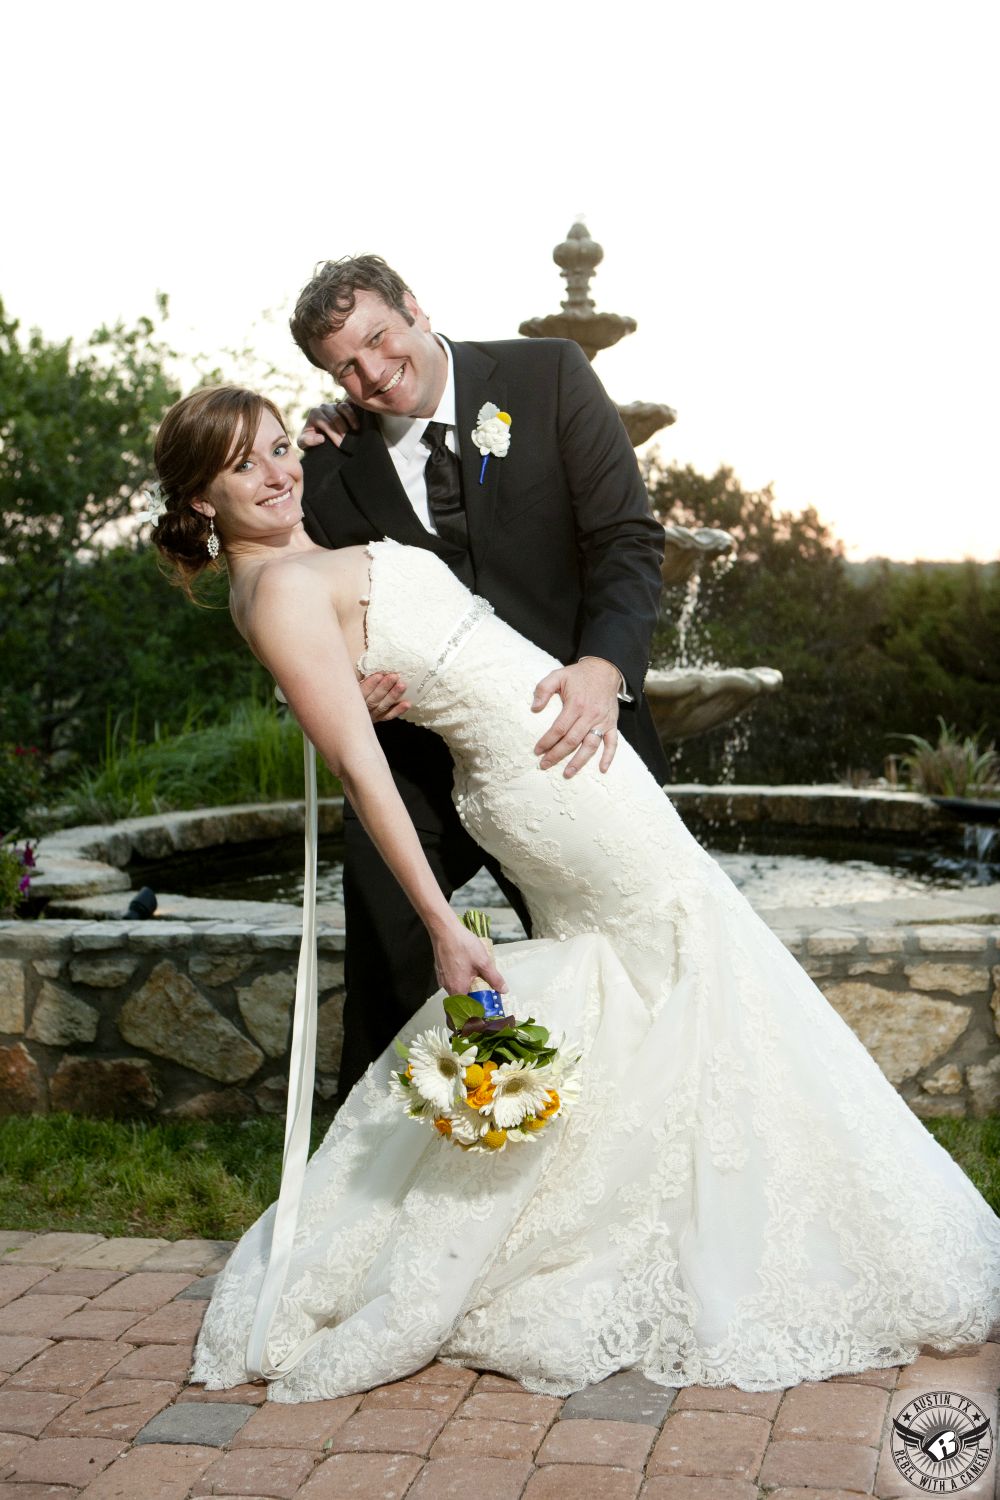 Bride in strapless lace mermaid styled dress with daisy and yellow billy balls bridal bouquet by Bouquets of Austin and makeup by Maris Malone Calderon and groom smile at the camera in front of camera at Nature's Point the Austin wedding venue.